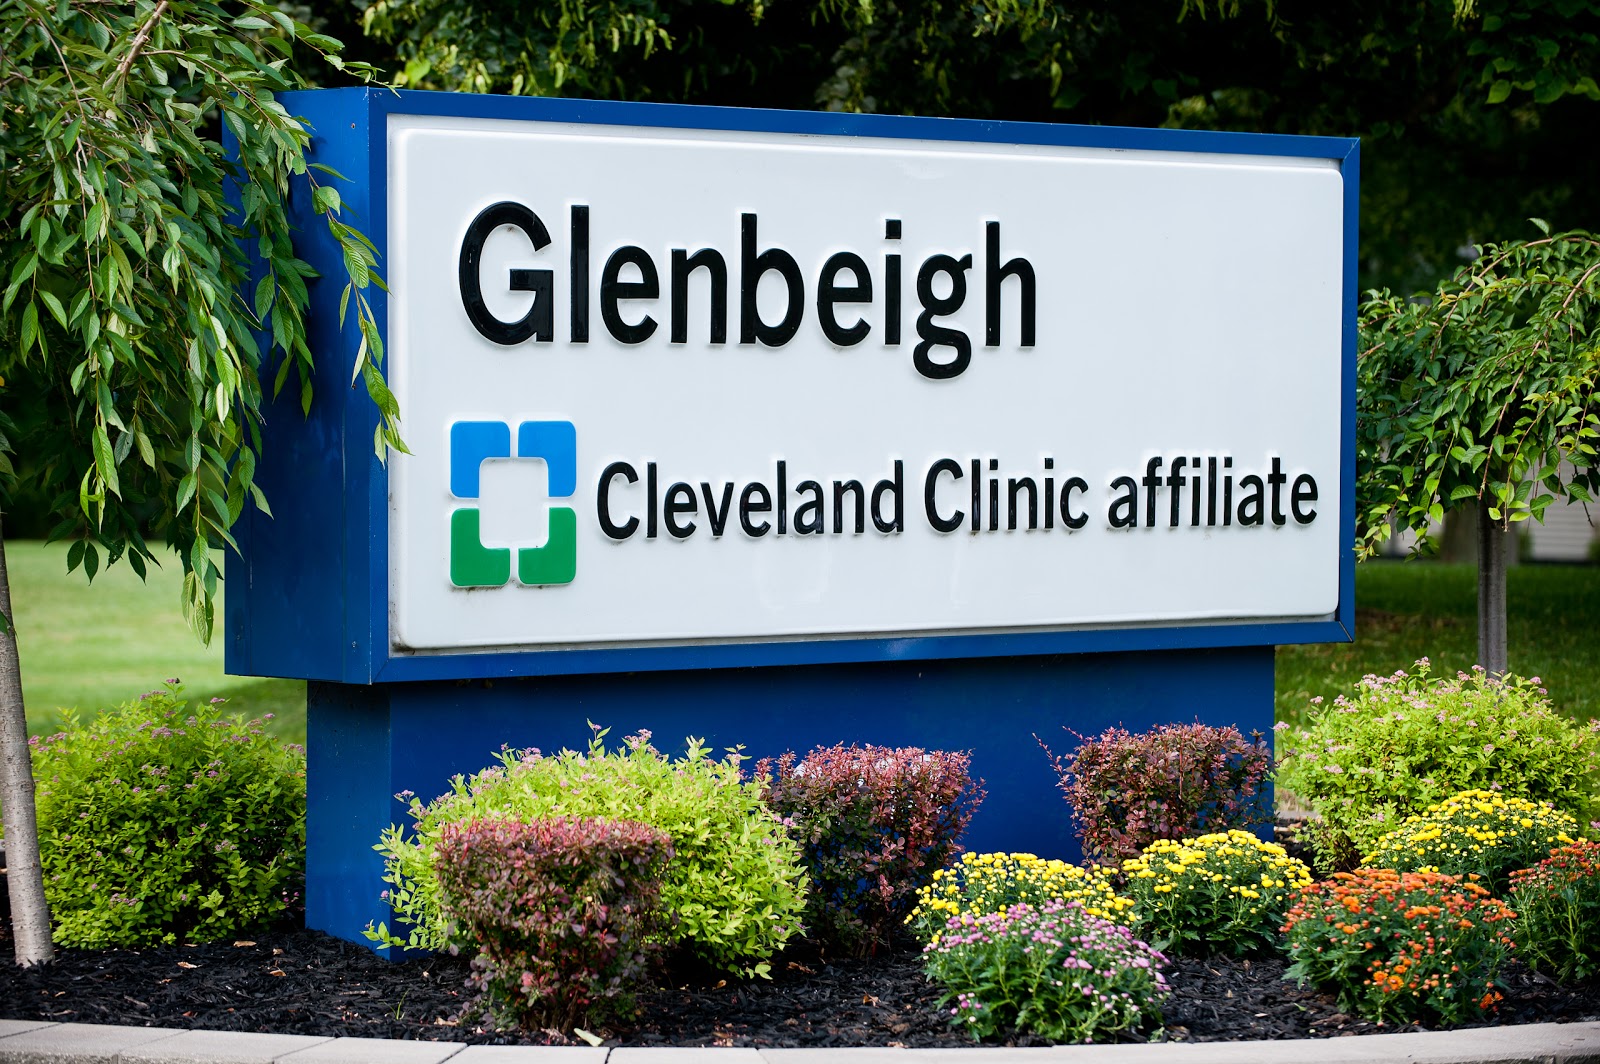 Glenbeigh Hospital and Outpatient Center